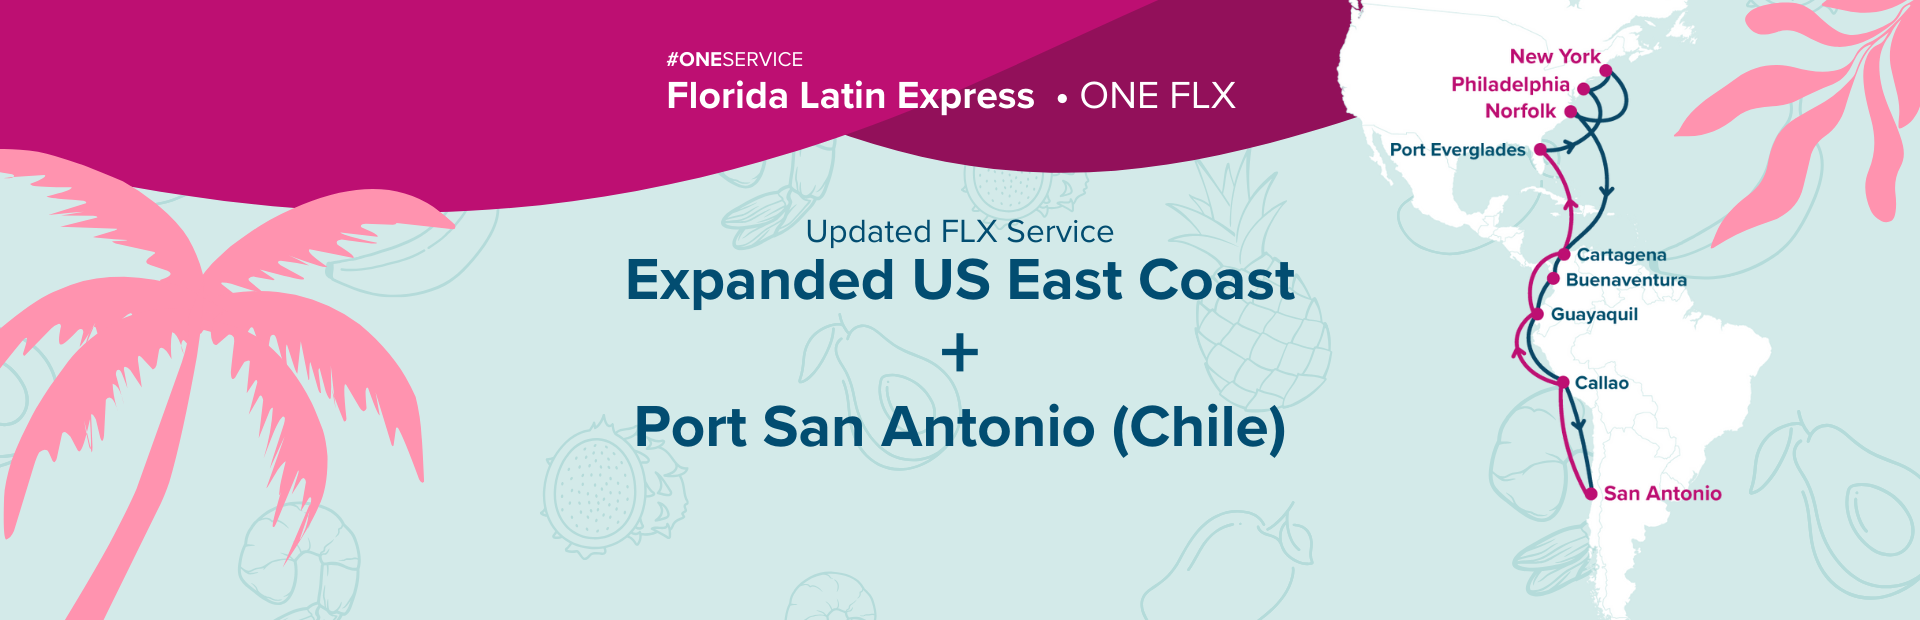 Updated FLX Service Expanded US East Coast + Port San Antonio (Chile)